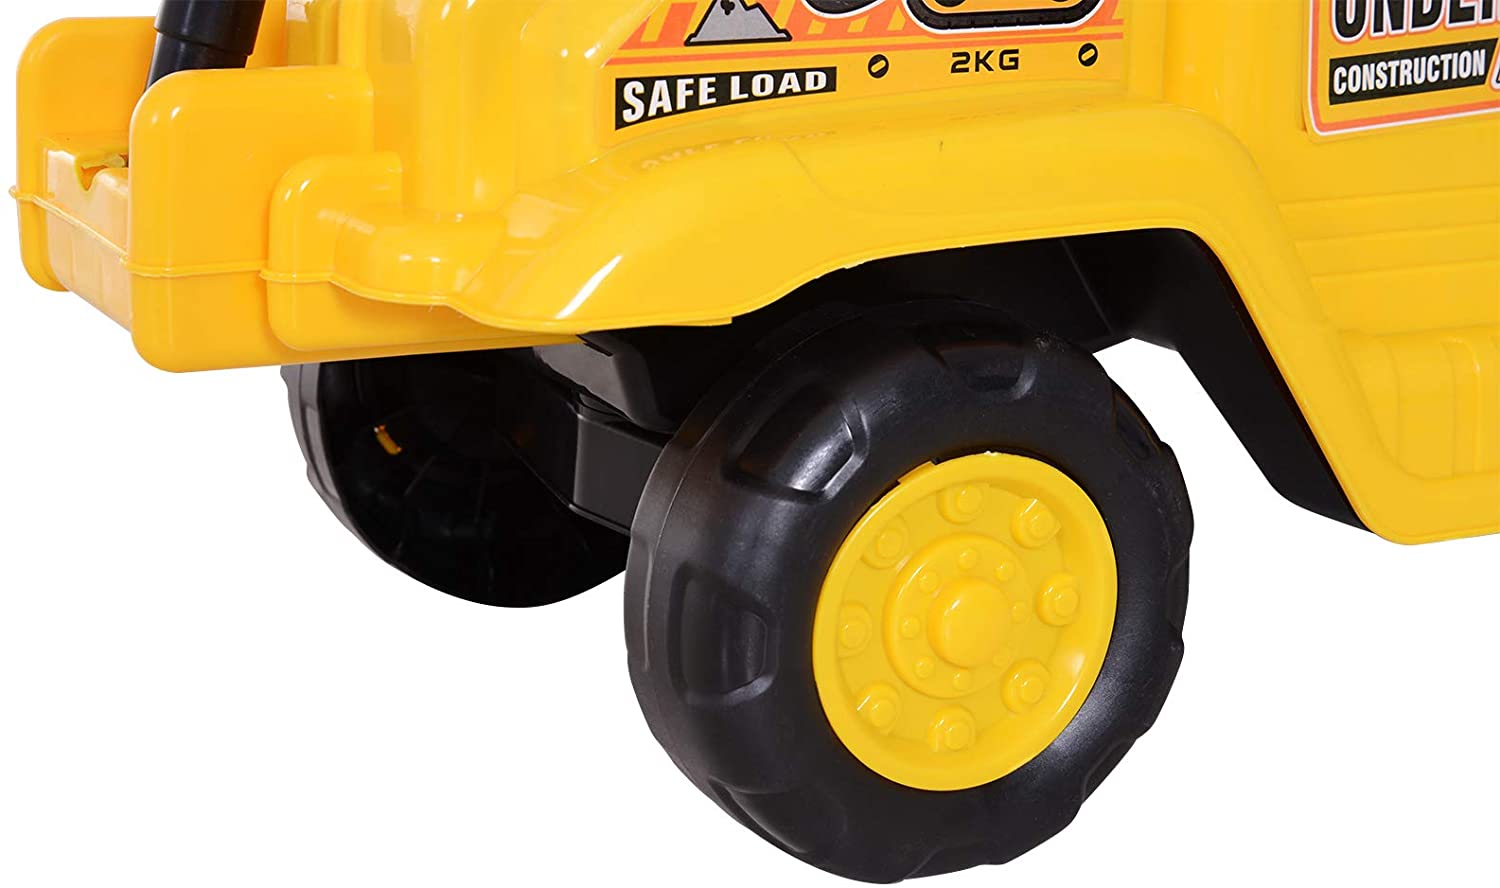 3 in 1 construction Digger ride on toy